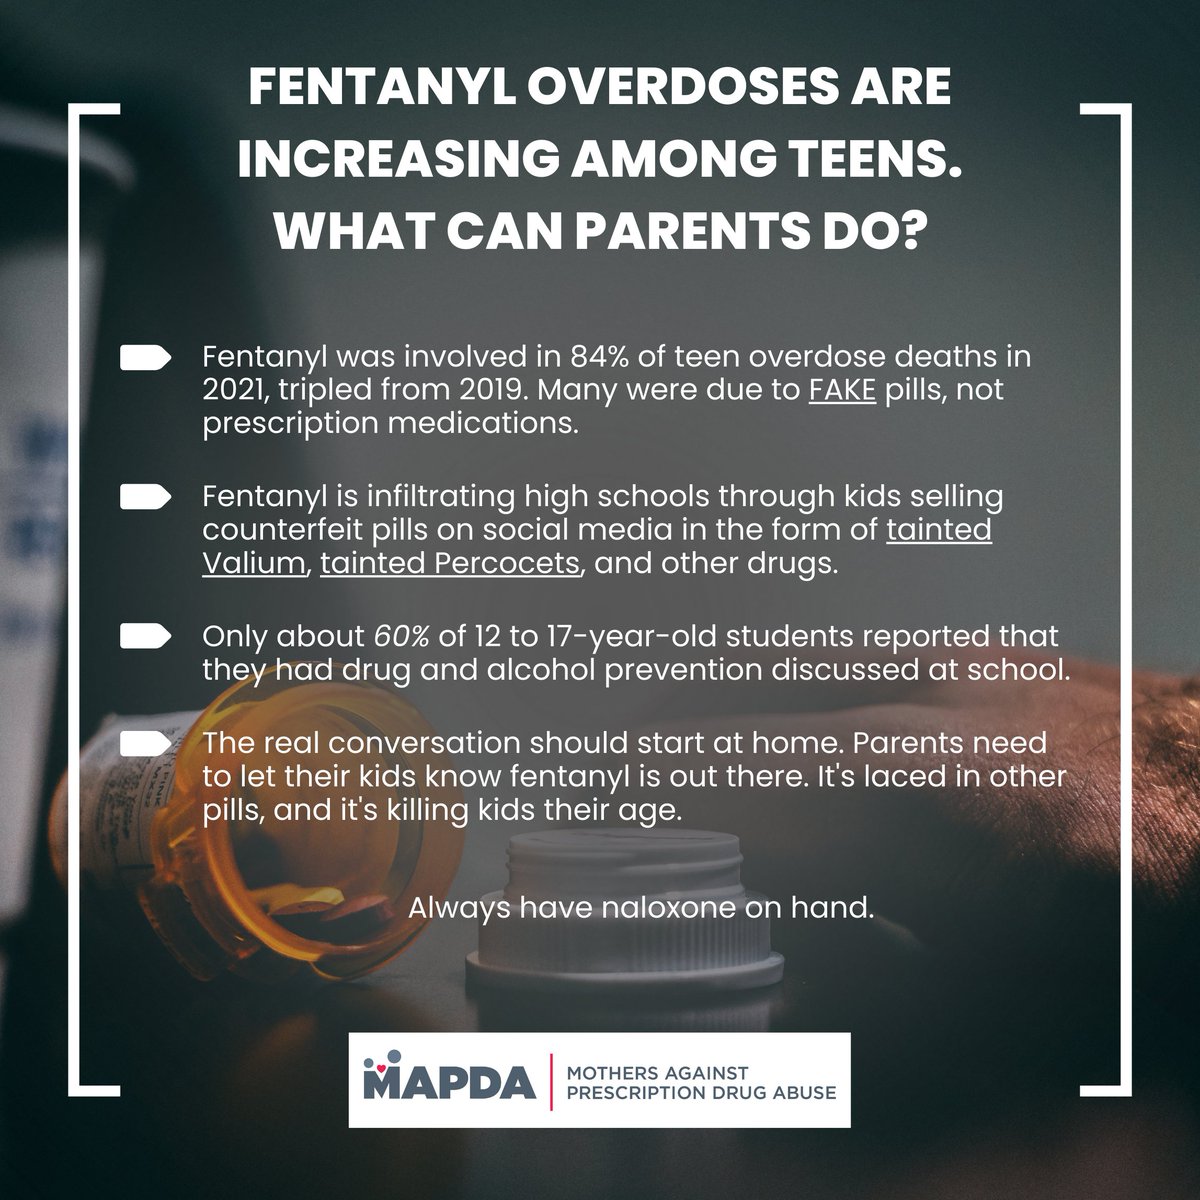 Teen and adolescent overdoses are on a swift rise due to drug dealers targeting them on social media. No drug is safe unless directly given by a legitimate pharmacy or dispensary. Just ONE pill can contain enough fentanyl to kill someone. It's not worth the risk. Have the…